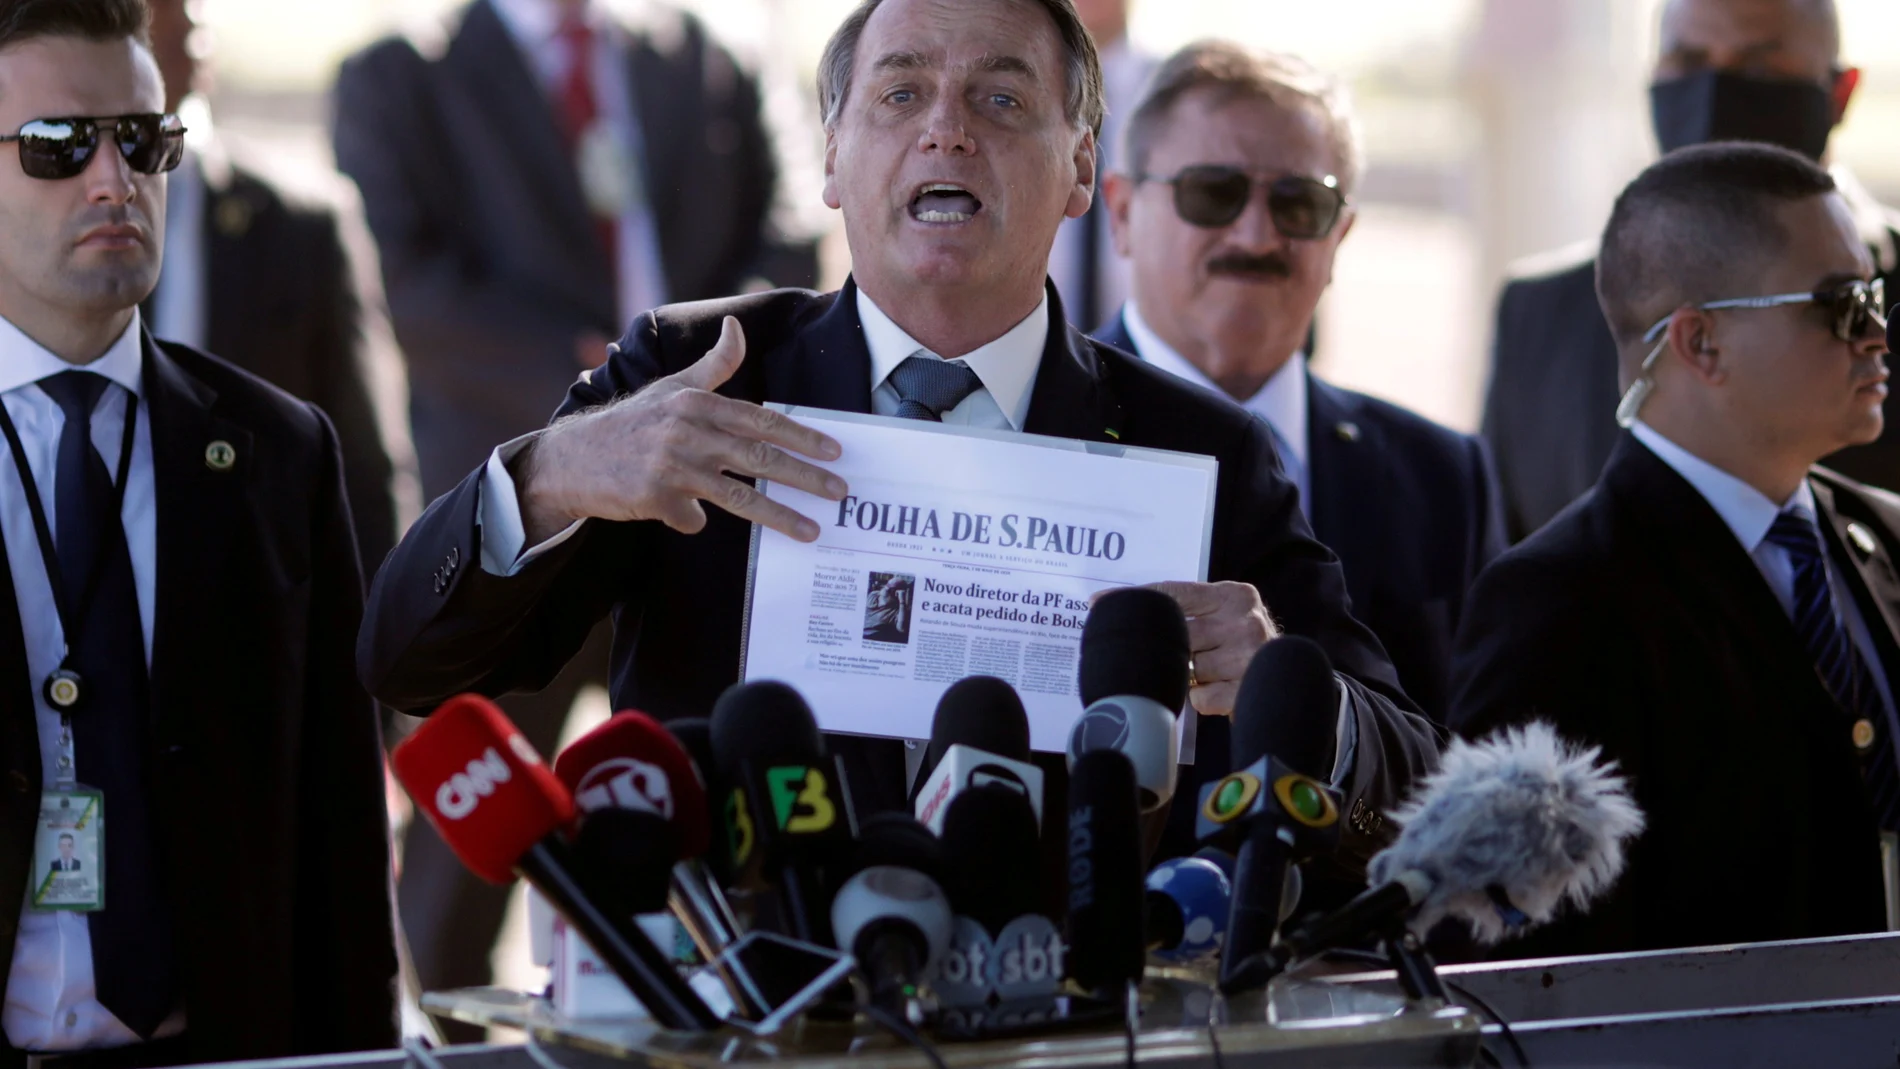 FILE PHOTO: Brazil's President Jair Bolsonaro holds a paper with a print of the first page of newspaper Folha de Sao Paulo, as he leaves Alvorada Palace, amid the coronavirus disease (COVID-19) outbreak in Brasilia, Brazil May 5, 2020. REUTERS/Ueslei Marcelino/File Photo